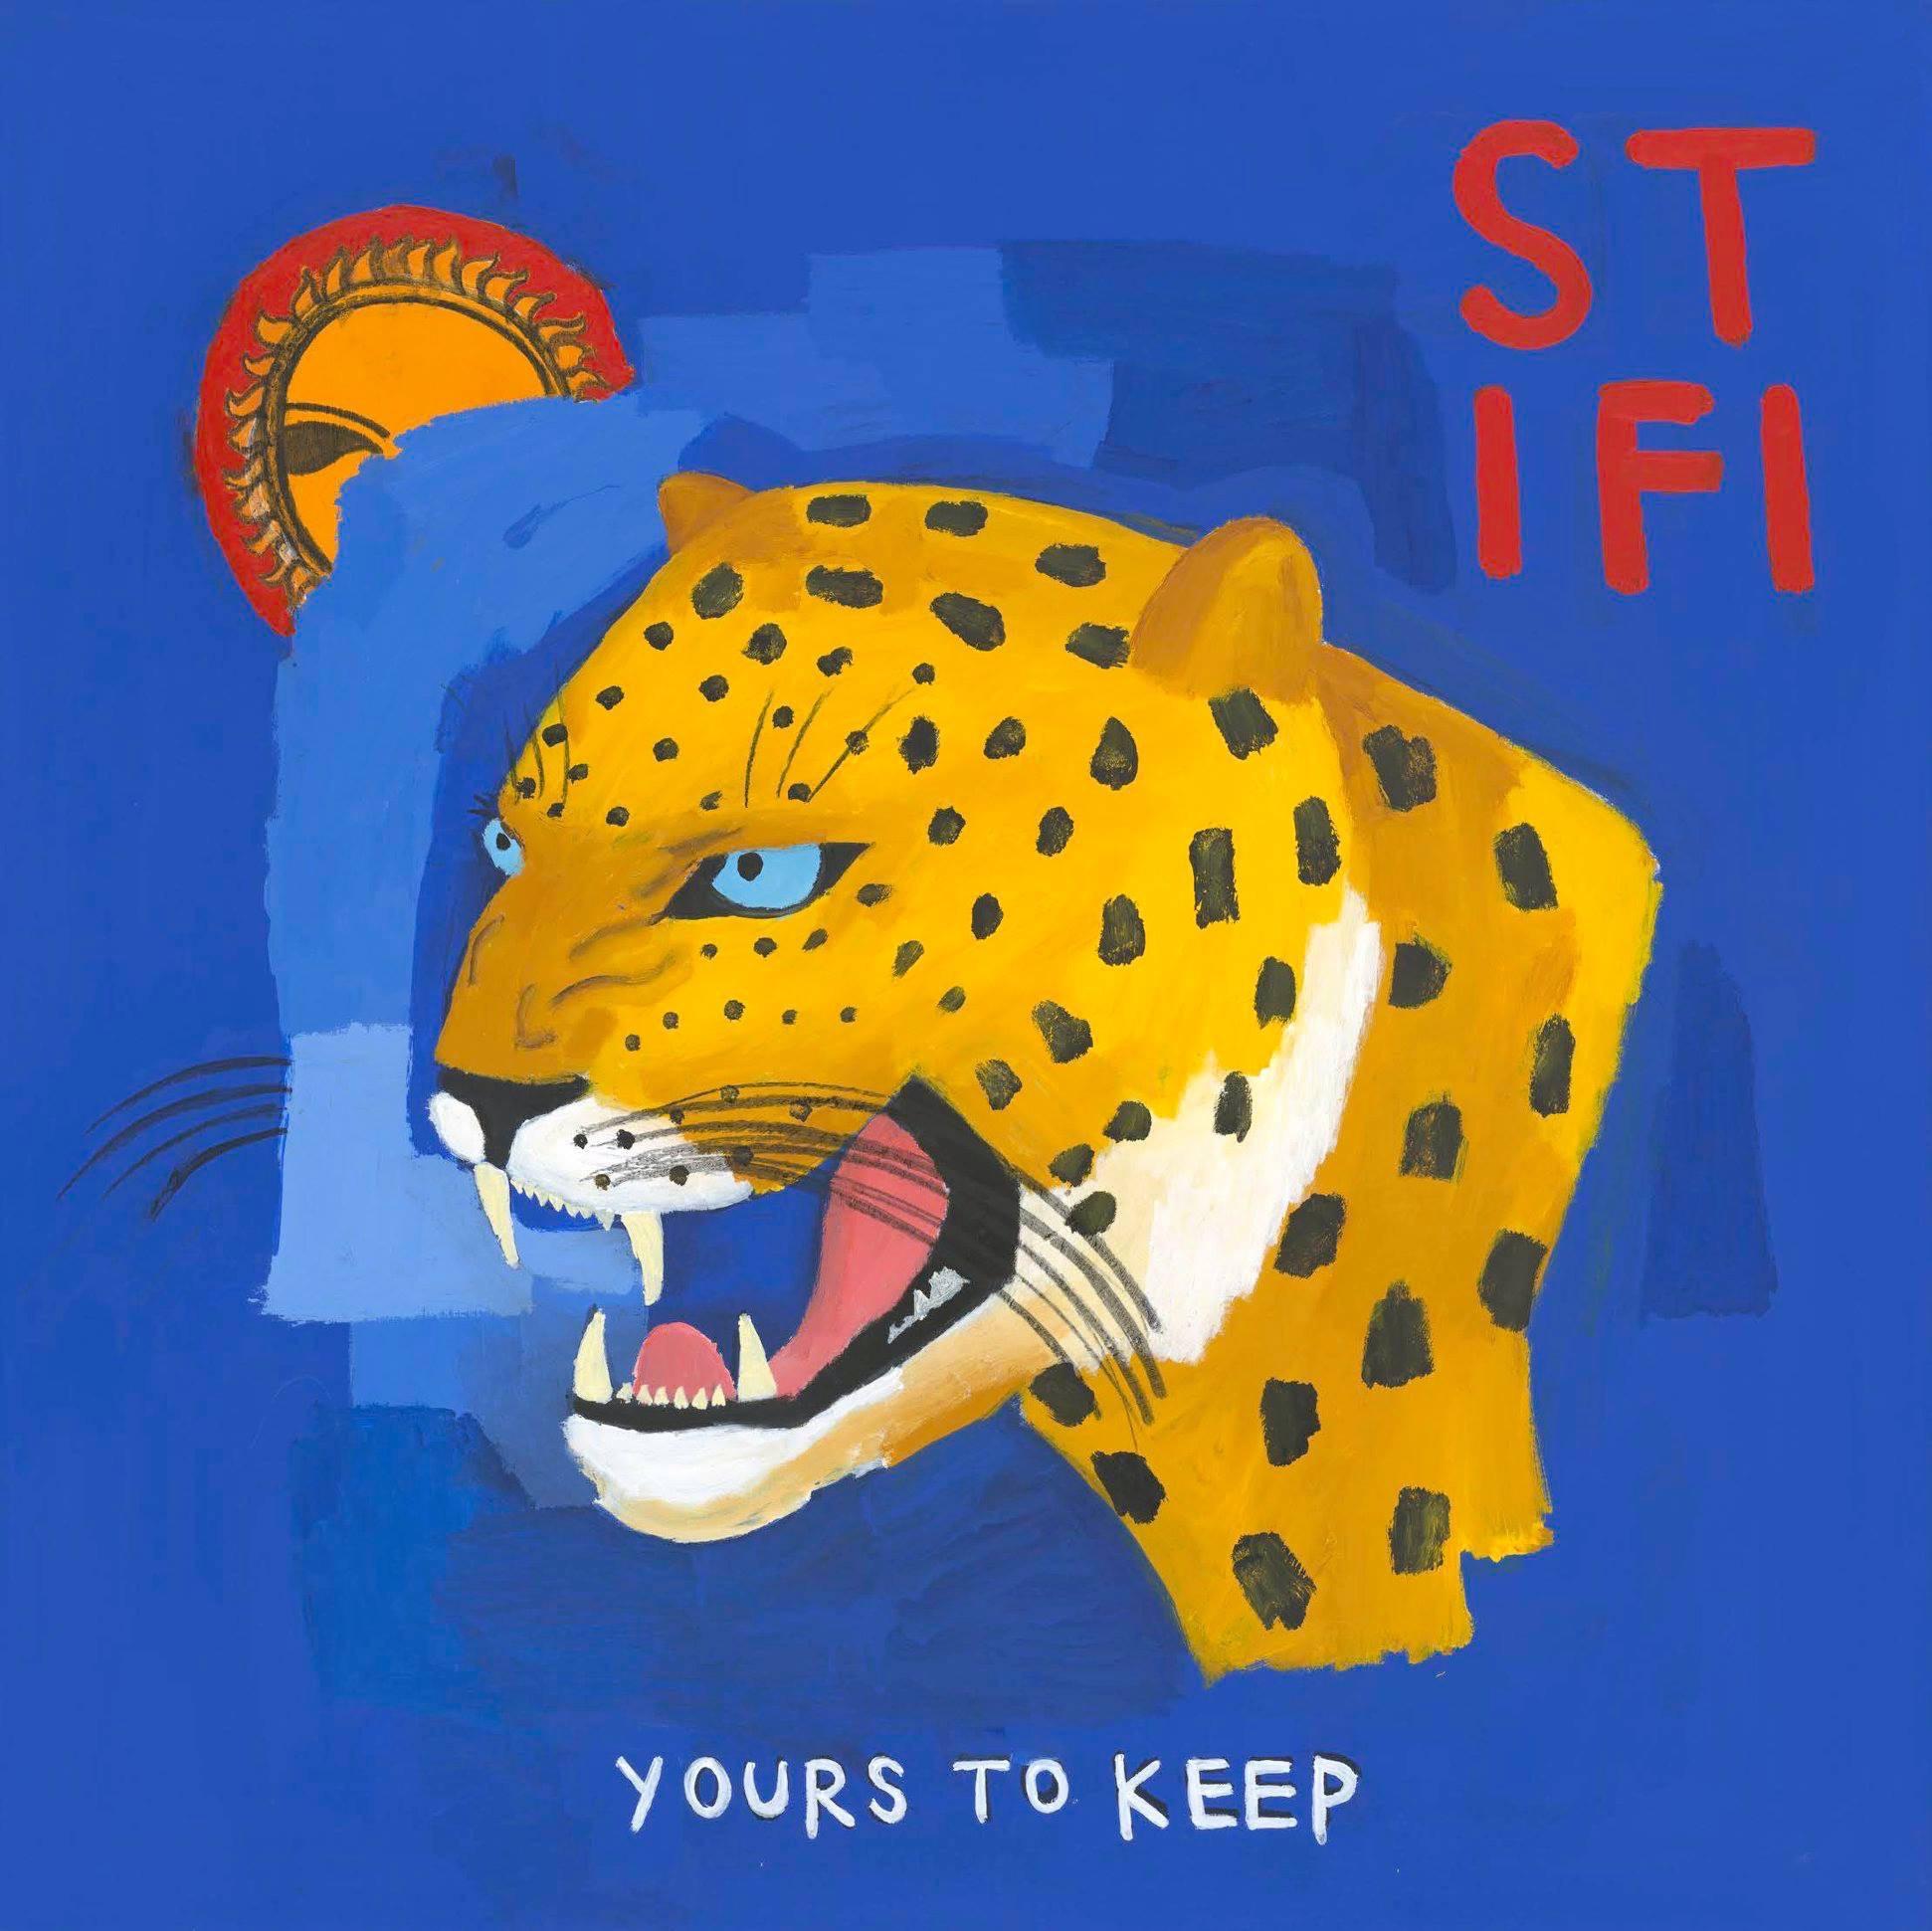 Sticky Fingers - Yours to Keep Album Art